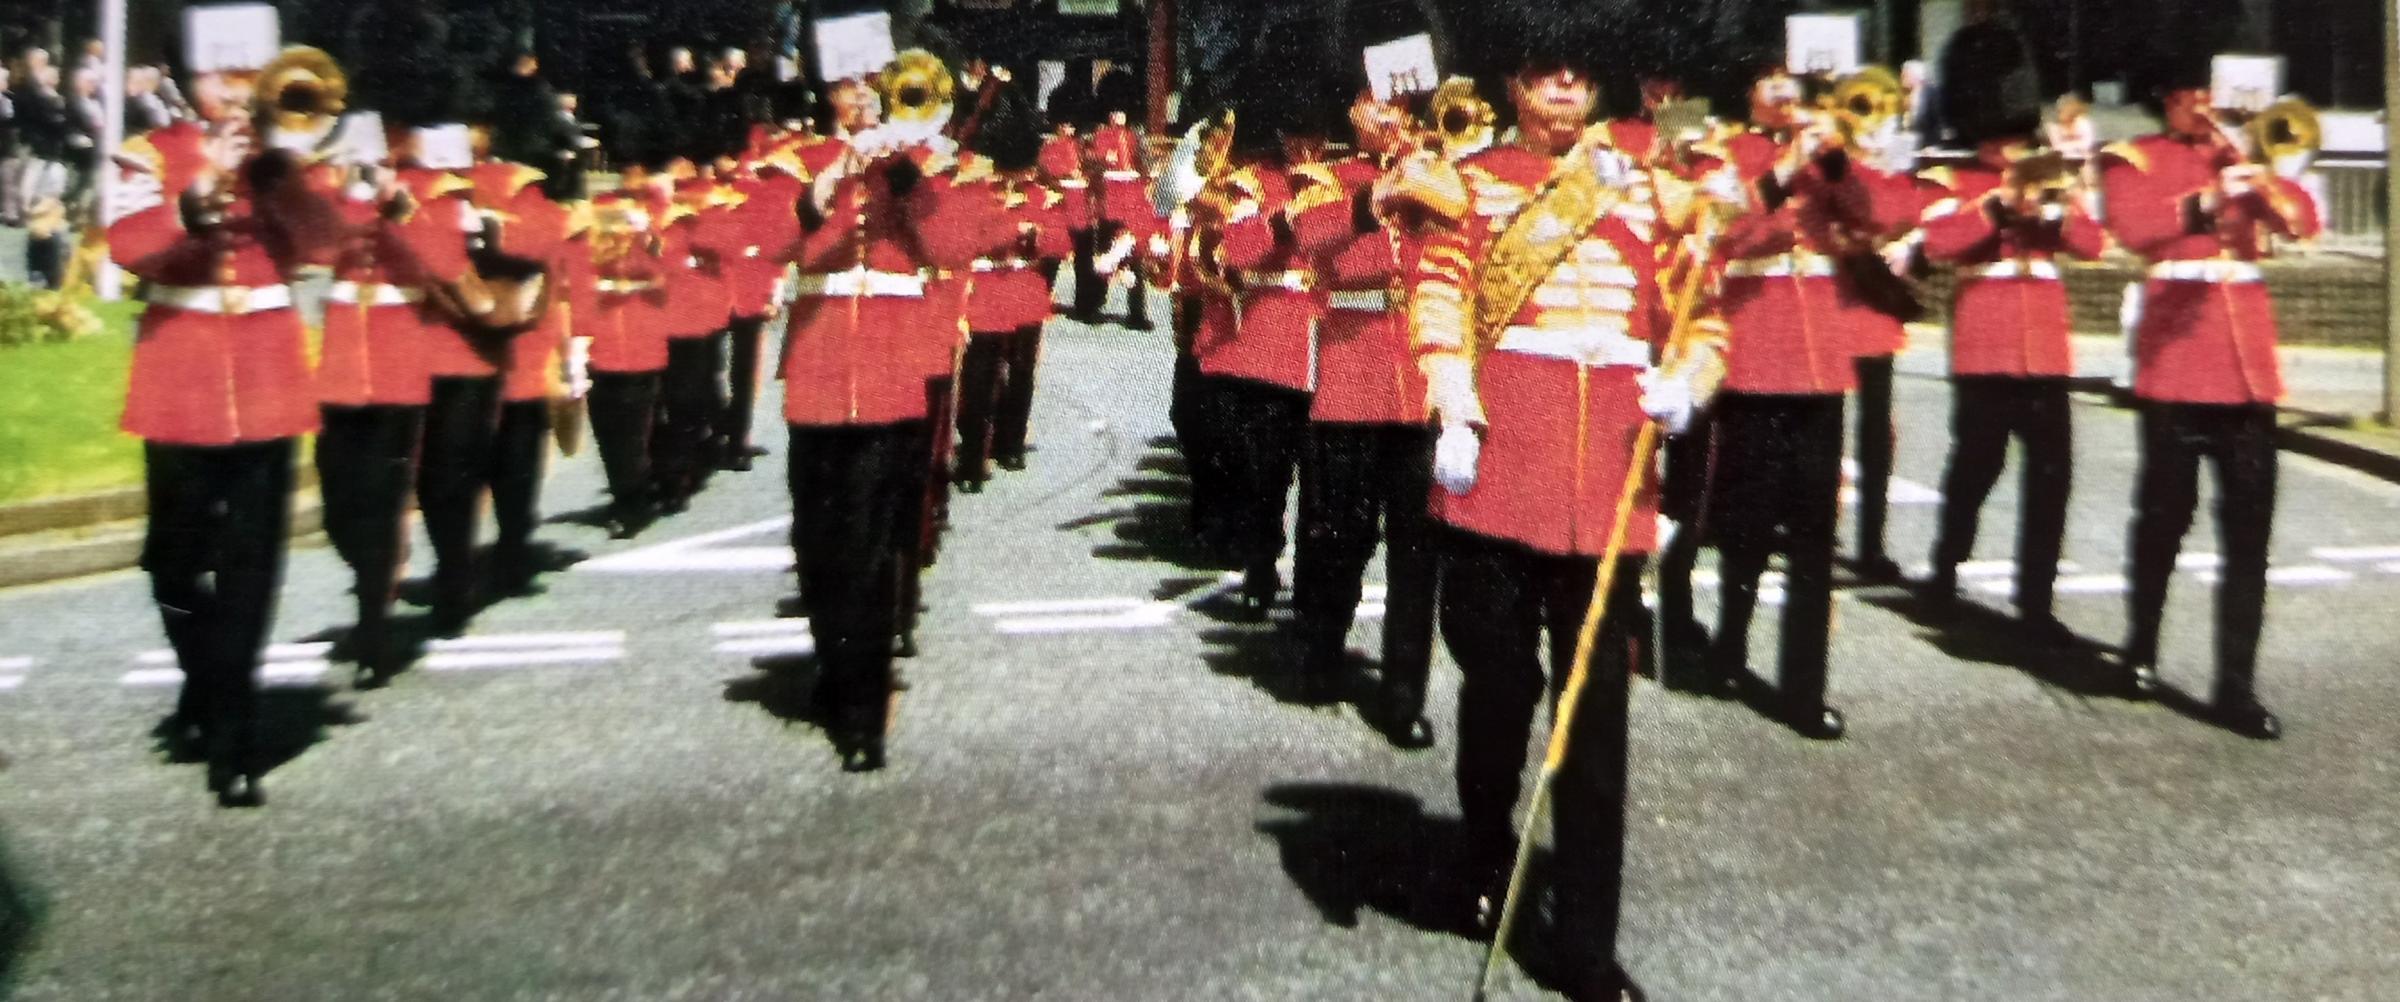 Marching through Worcester in May, 1999 at the Freedom of the City